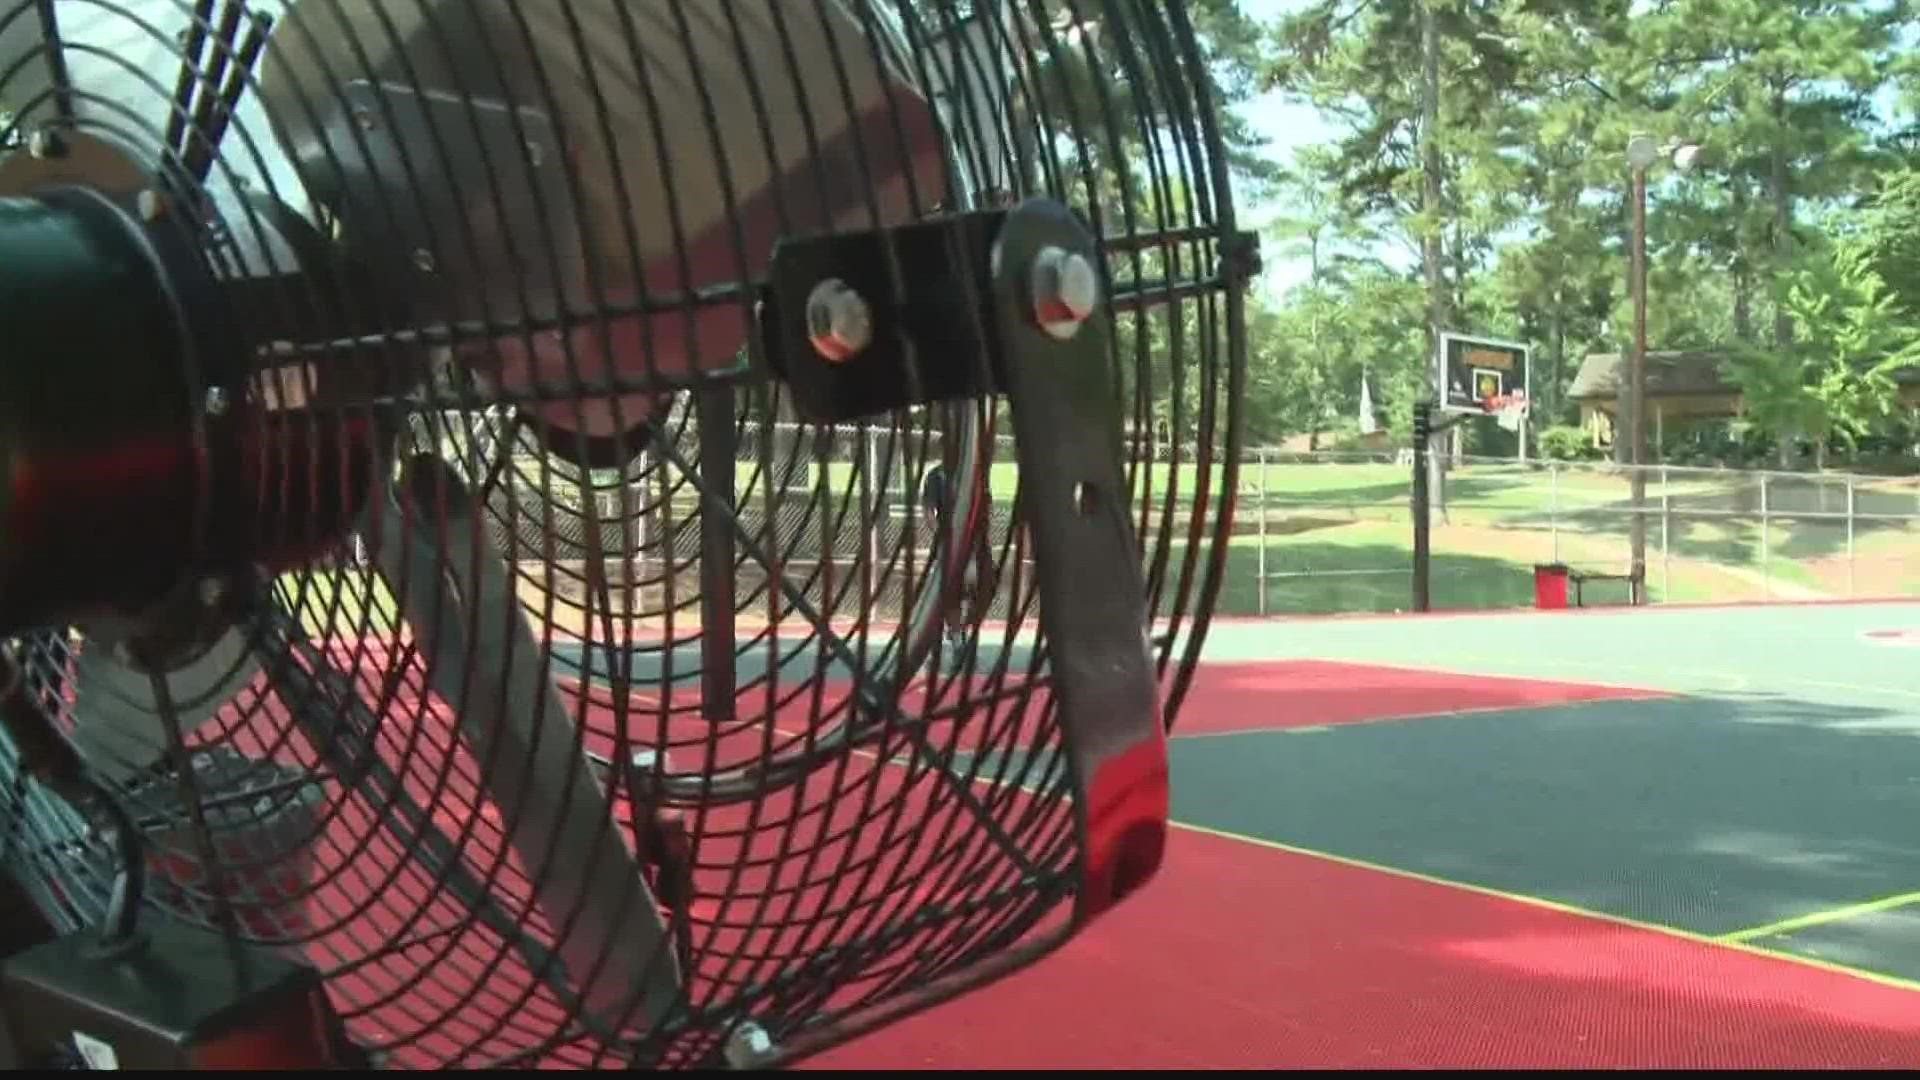 Water vessels will be placed at 10 City of South Fulton parks to keep kids cool when they're practicing sports.